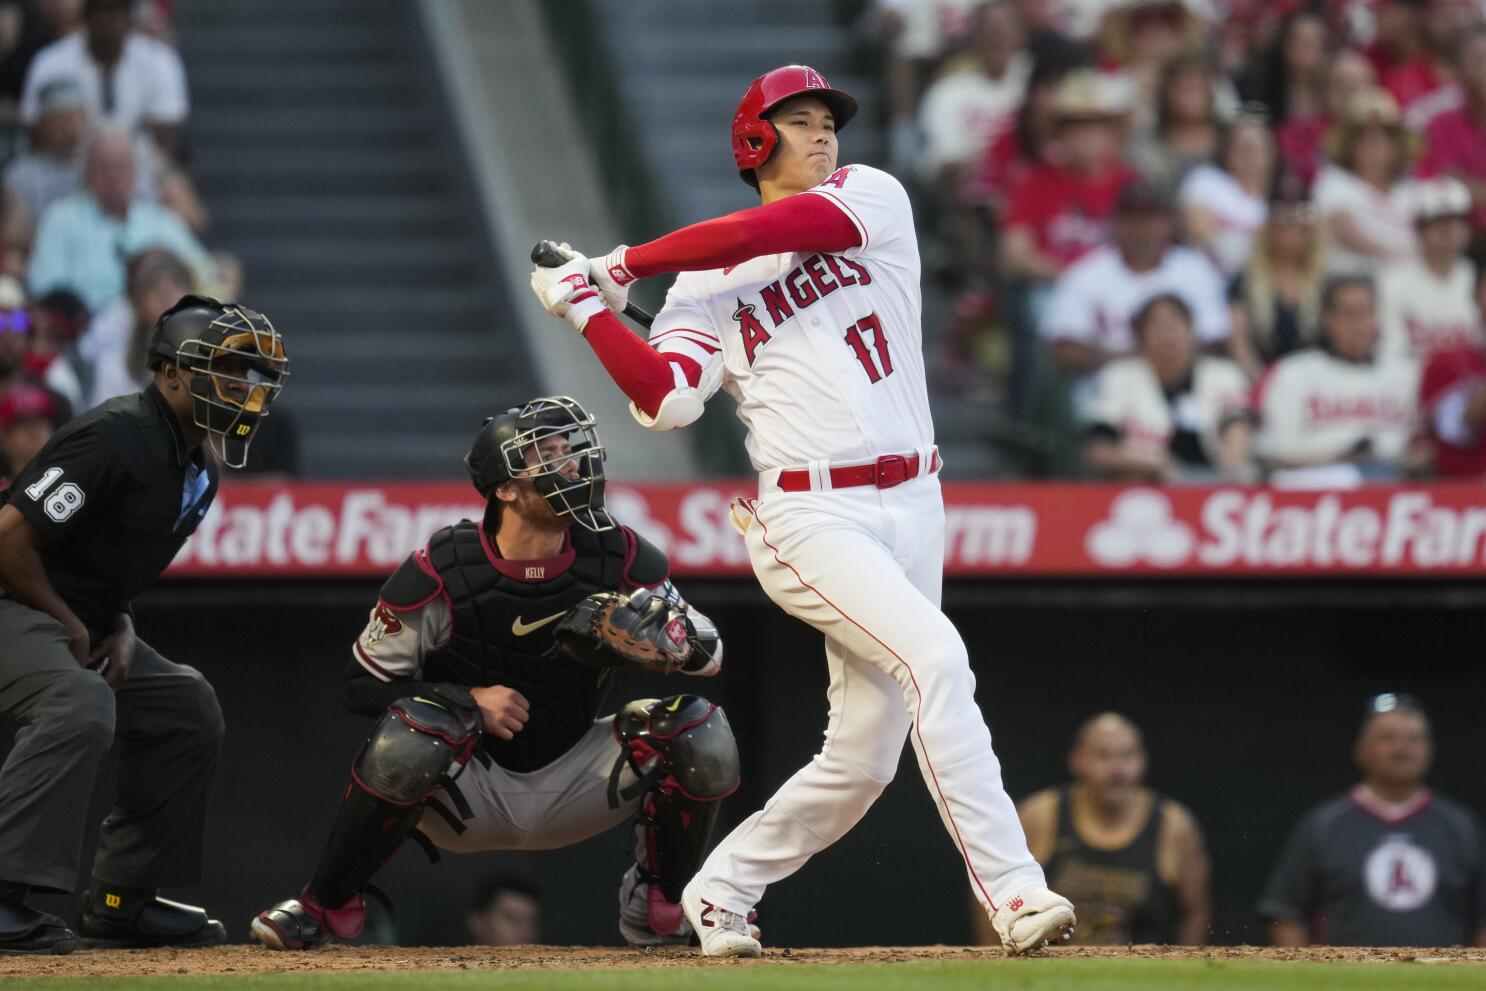 Bobby Abreu's single in ninth leads Angels past Jays